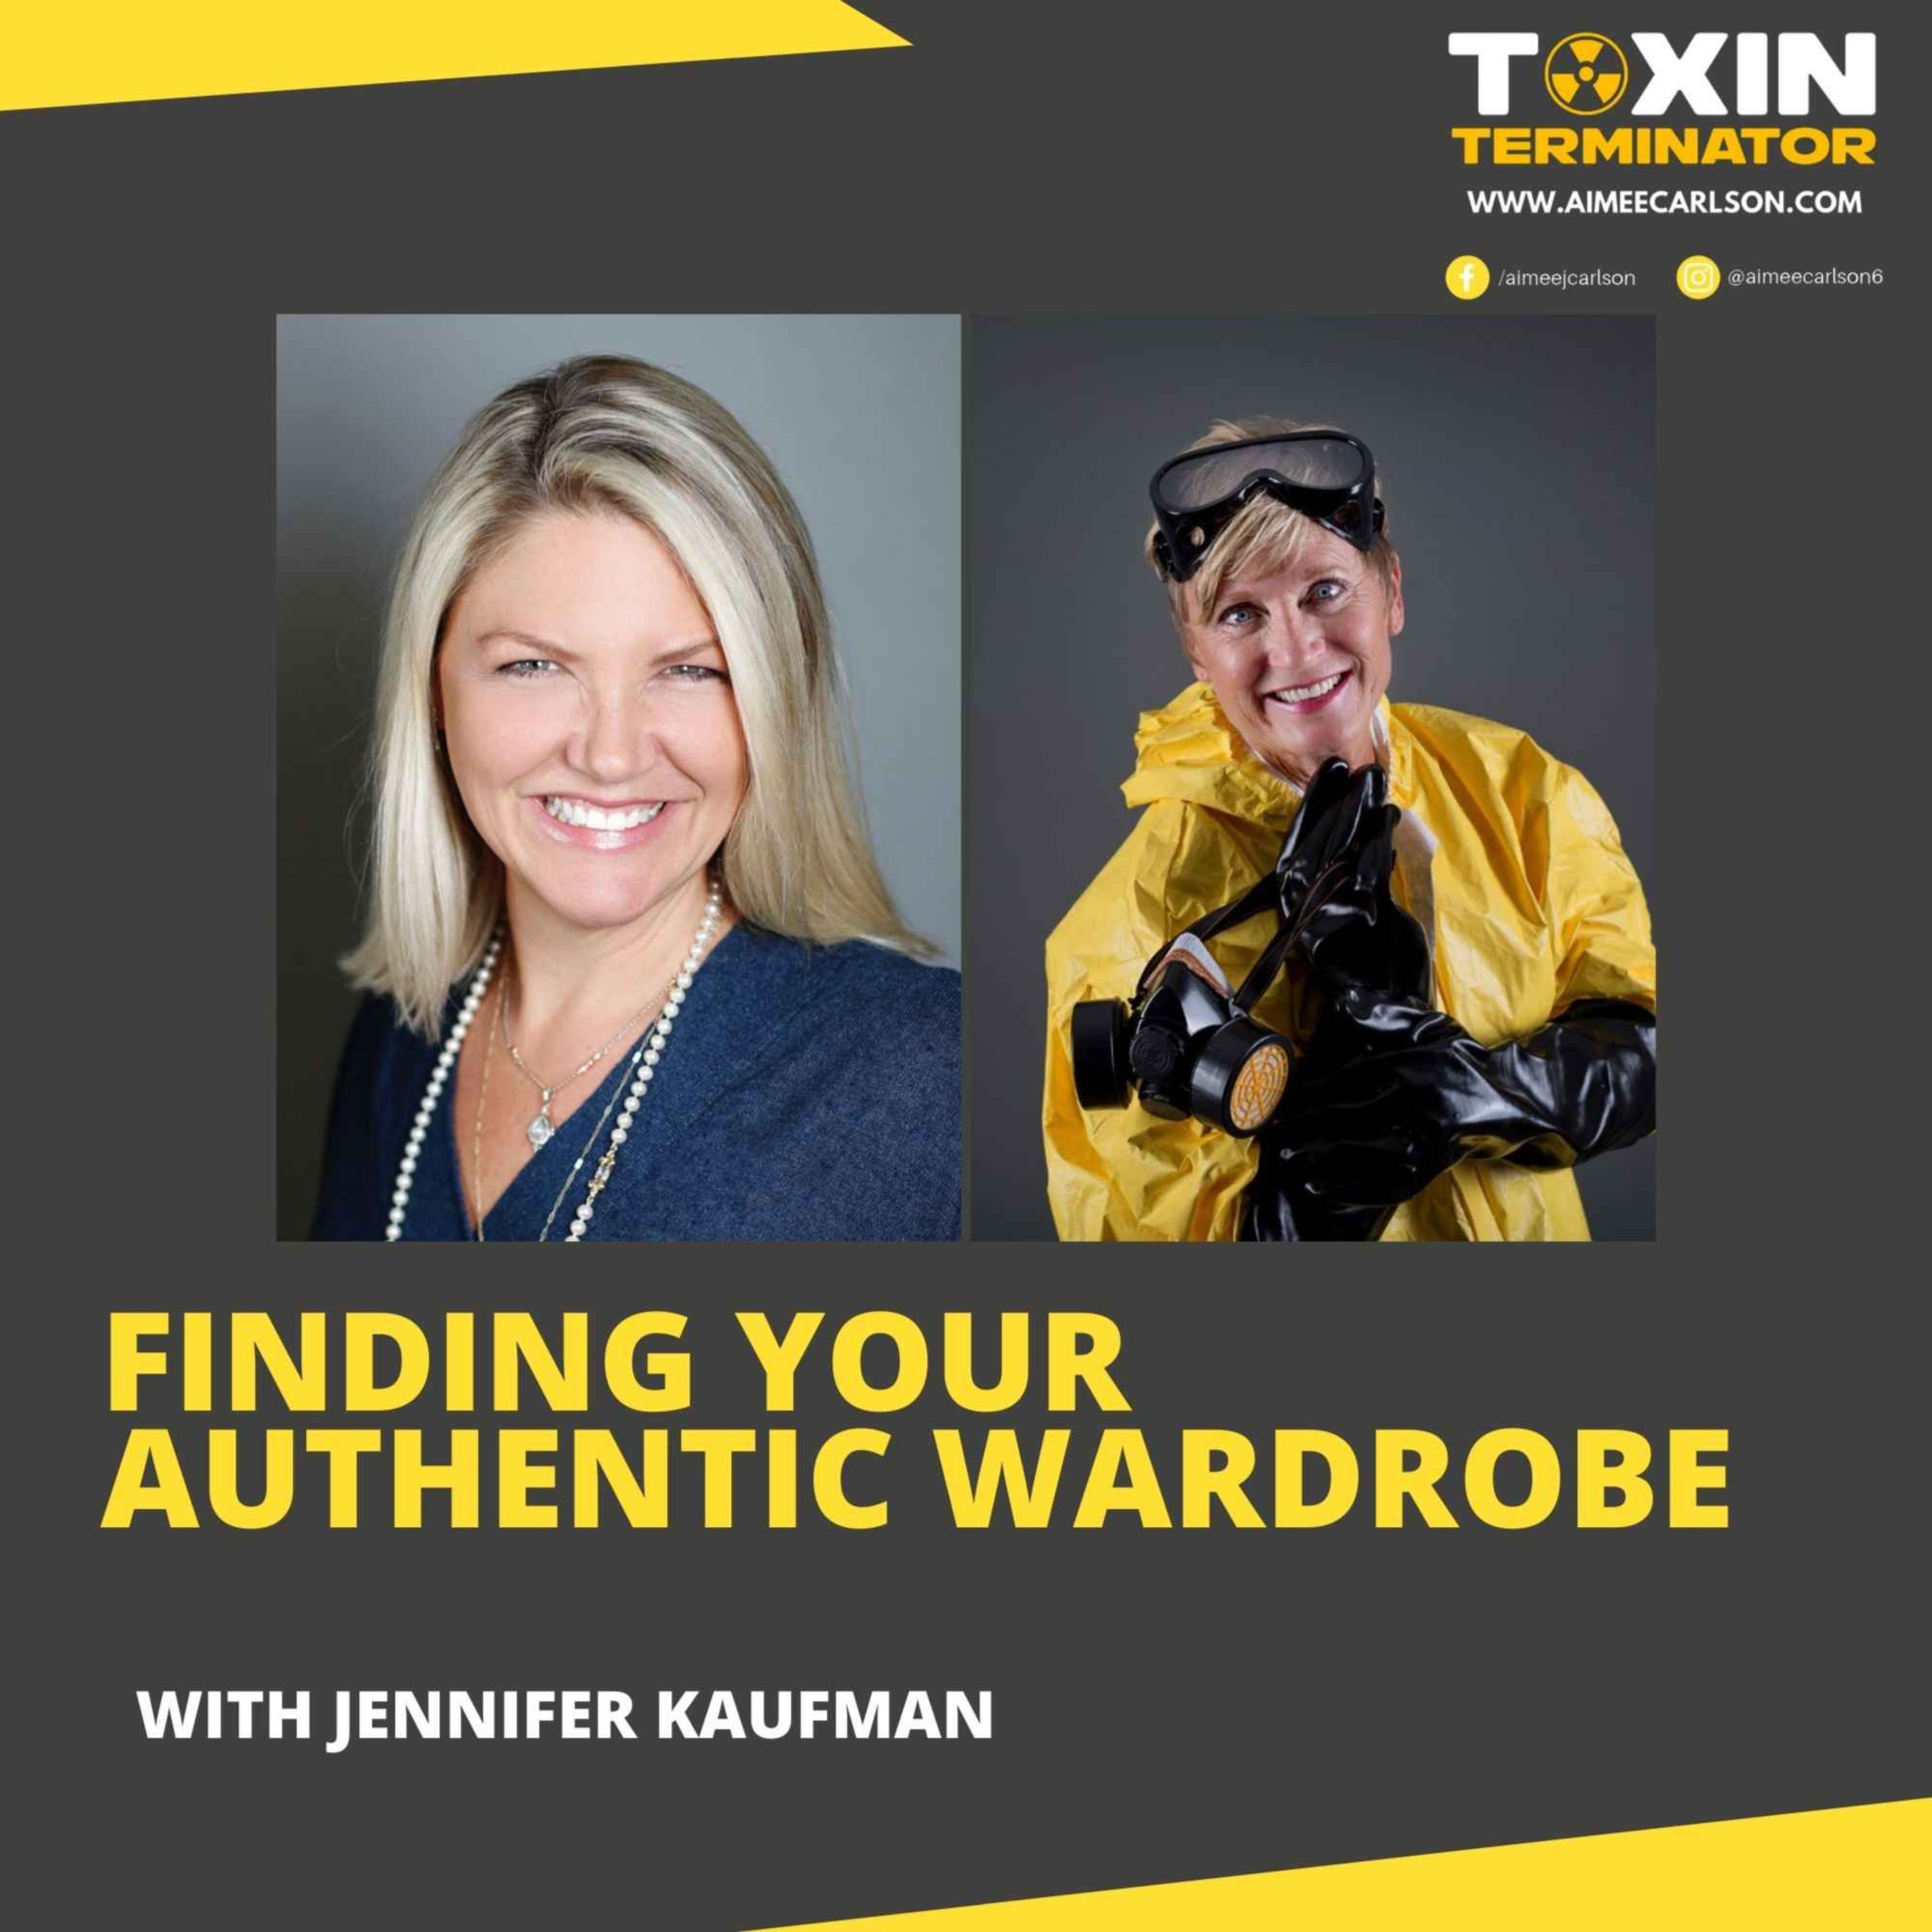 Finding Your Authentic Wardrobe with Jennifer Kaufman